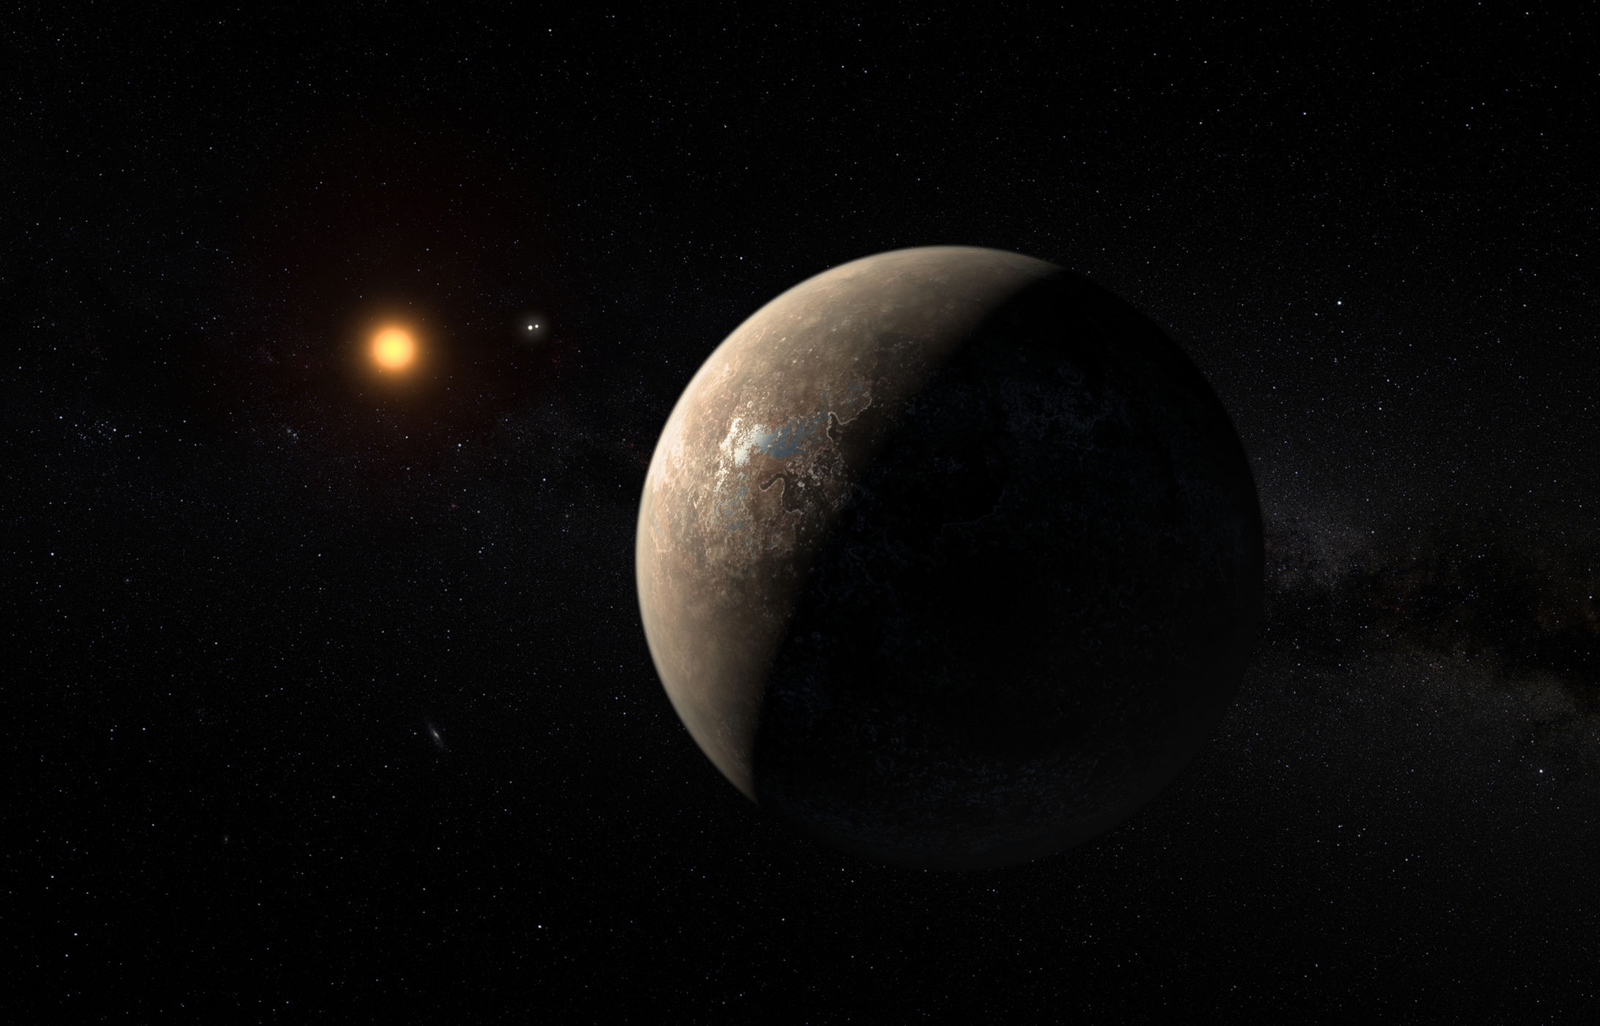 Artist’s impression shows the exoplanet Proxima b, which orbits the red dwarf star Proxima Centauri. The double star Alpha Centauri AB appears in the image between the exoplanet and its star.
Credit: ESO/M.Kornmesser